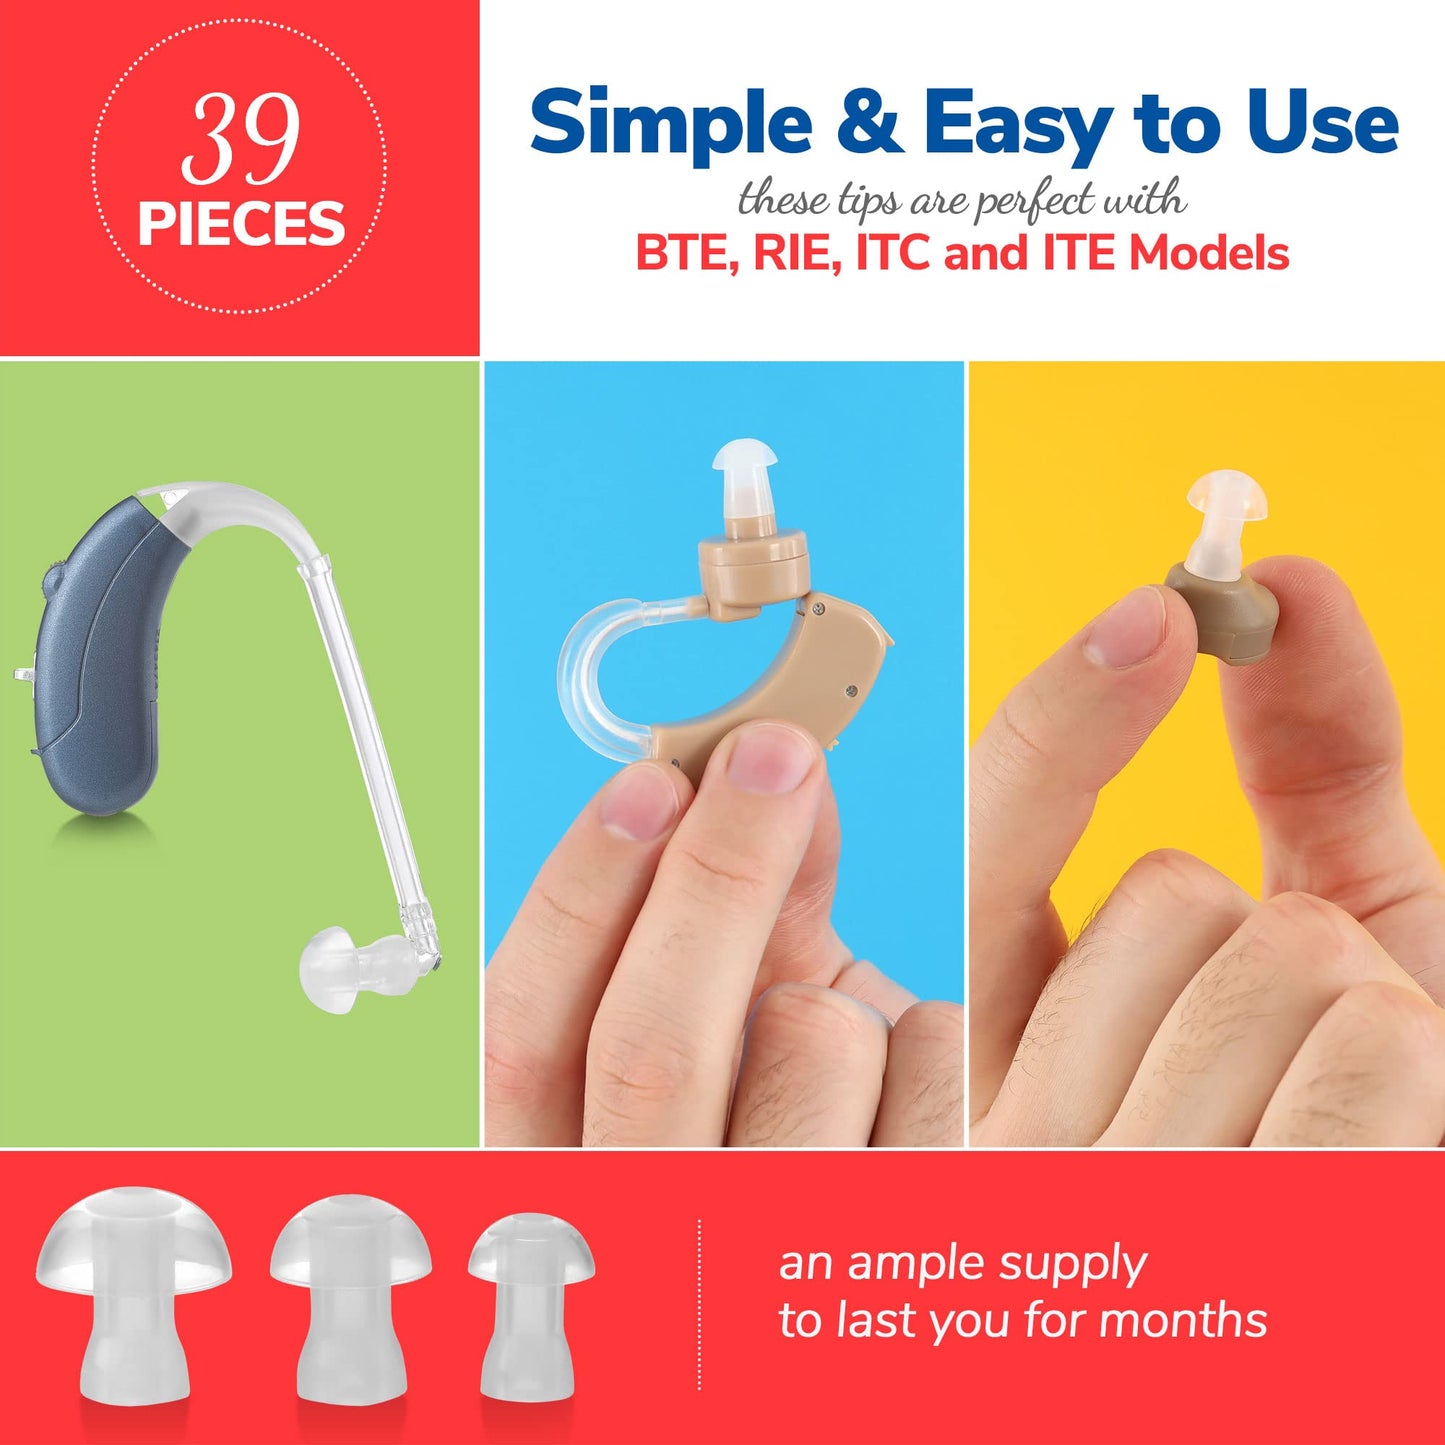 NewEar Hearing Aid Domes - Universal Domes for Hearing Aids - Sizes Small, Medium, Large & X-Large Earbud Replacements and BTE Hearing Sound Amplifiers